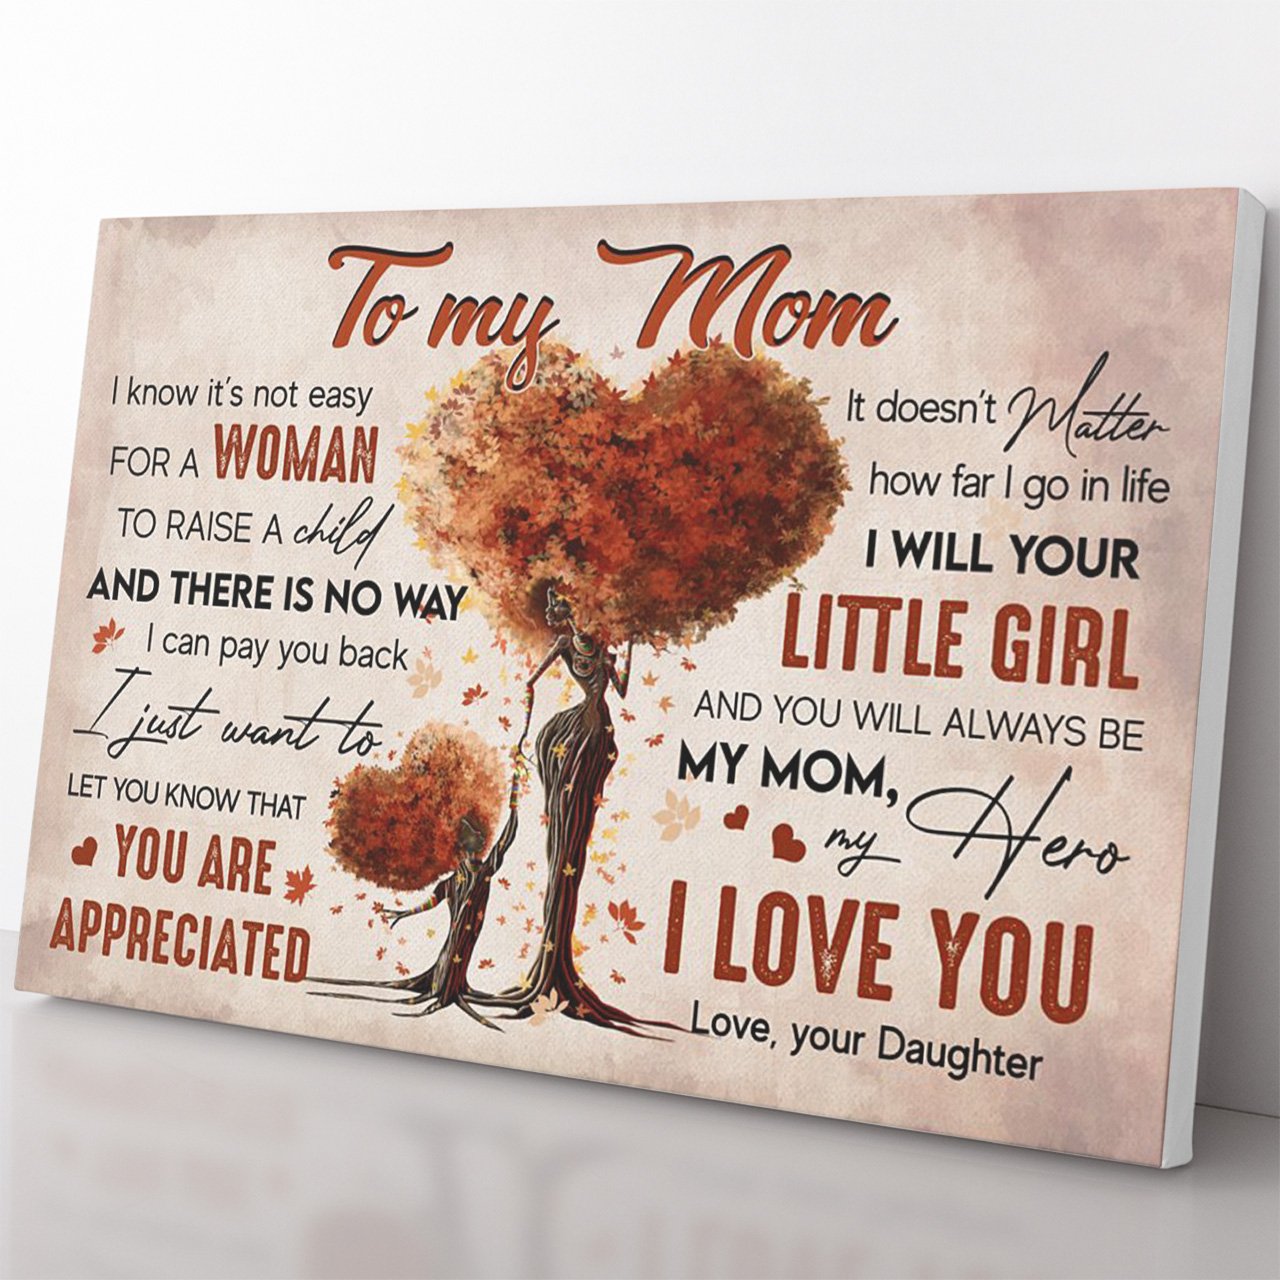 Personalized Canvas Gift For Afro Mom, You Are Appreciated, No Matter How Far I Go Canvas from Daughter, Thoughtful Mother Birthday Gift Ideas